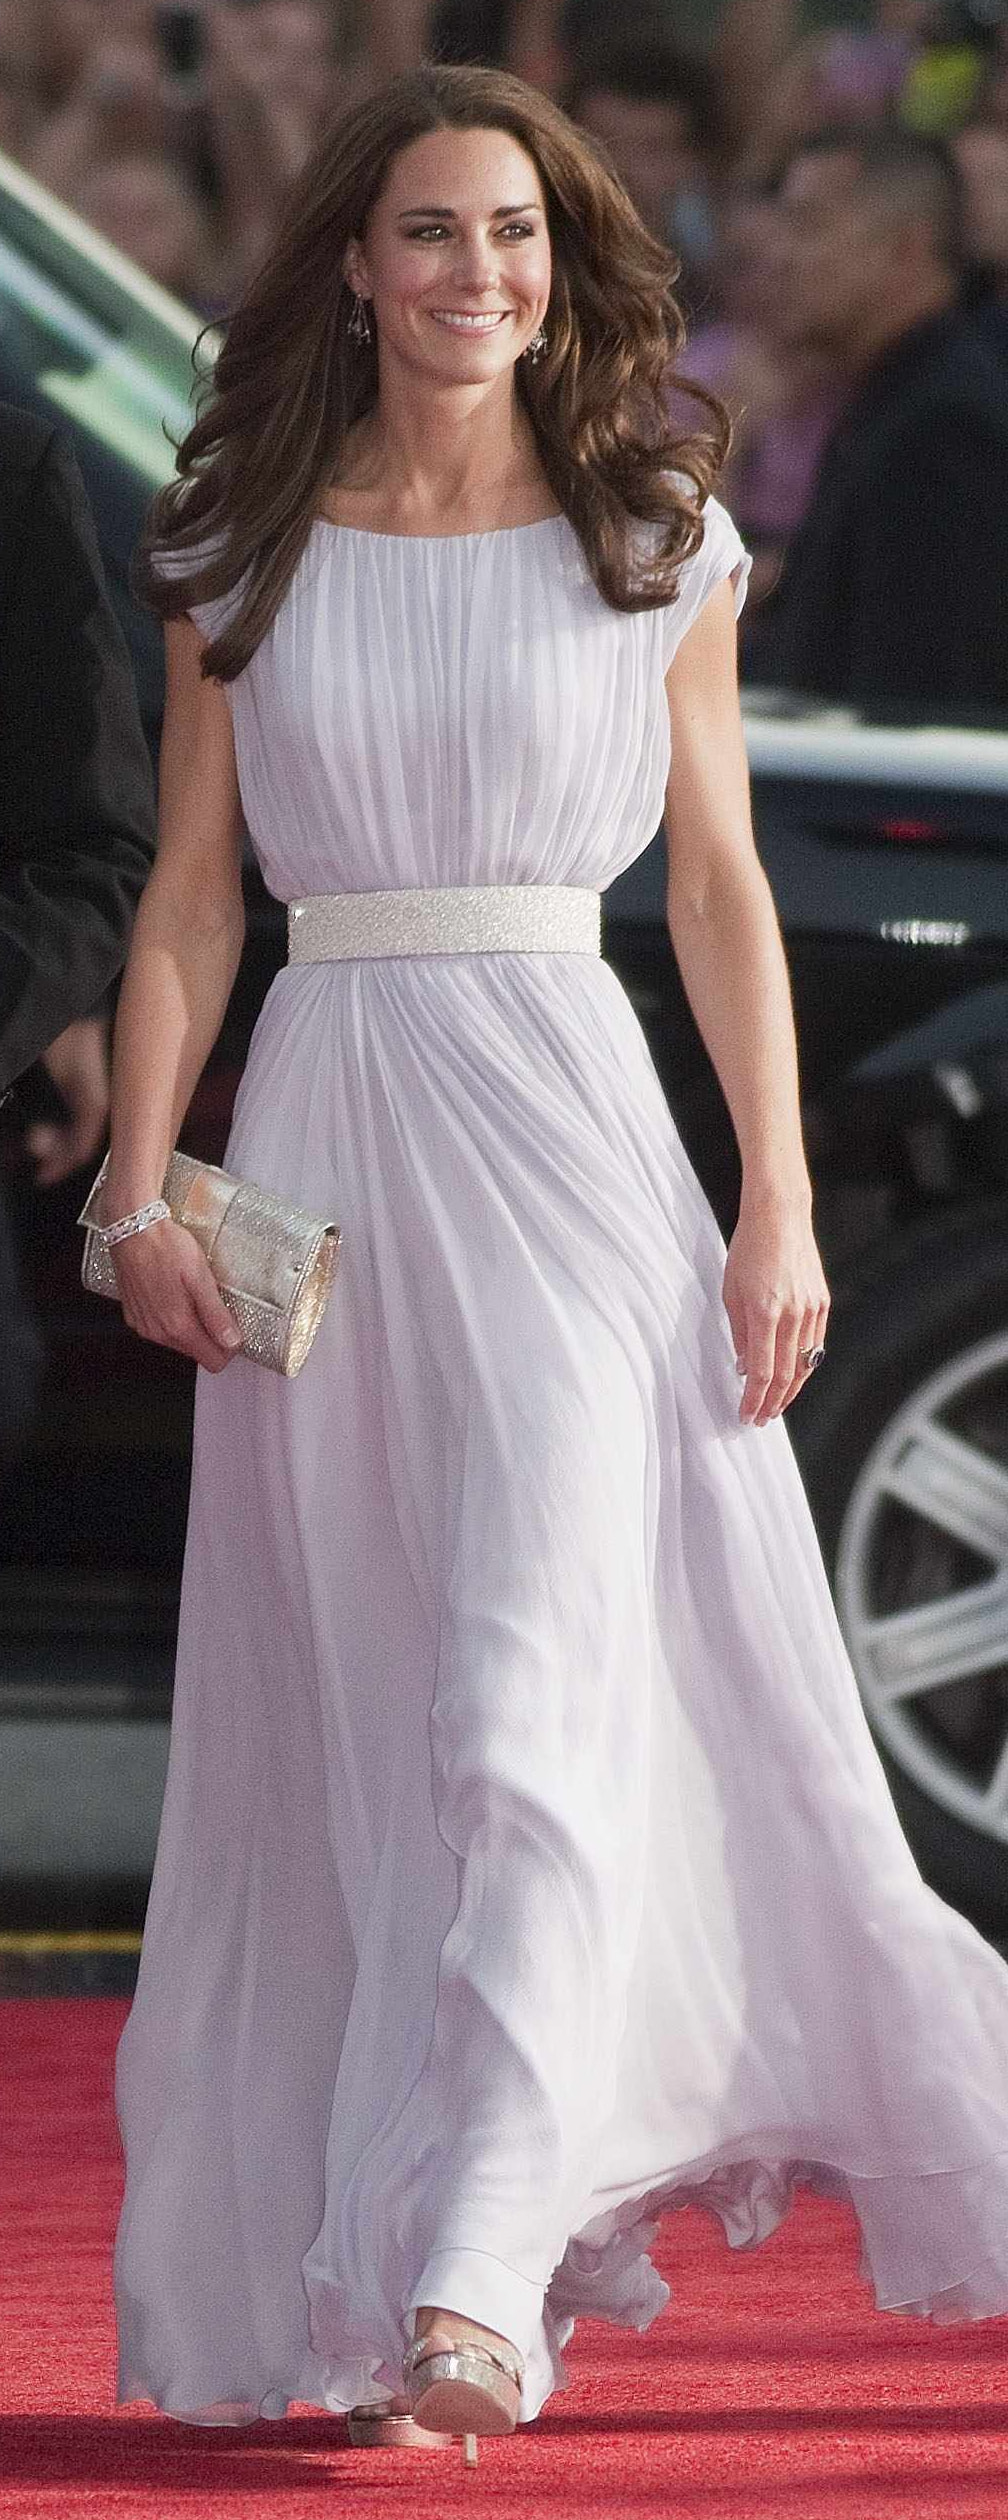 Alexander McQueen Lilac Grecian Gown as seen on Kate Middleton, The Duchess of Cambridge.